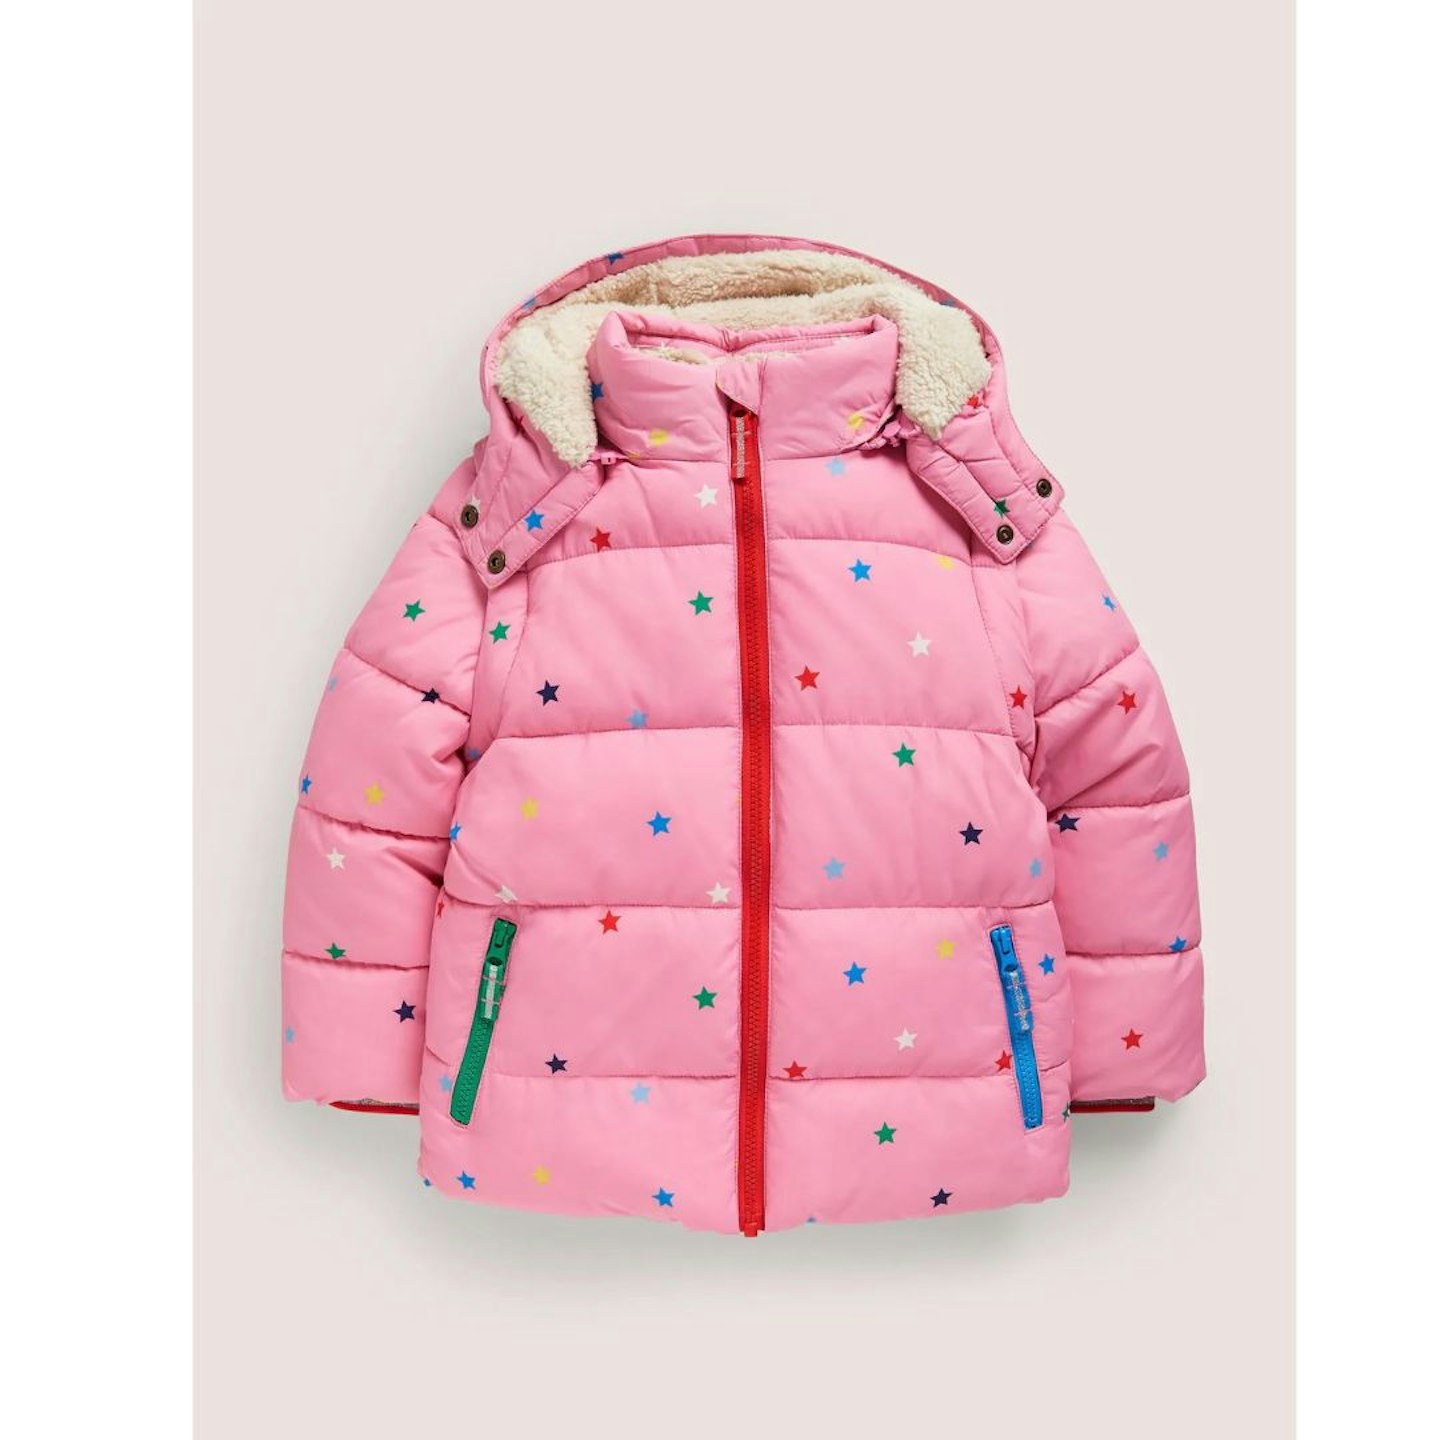 Pink Star Print Hooded Puffer Jacket